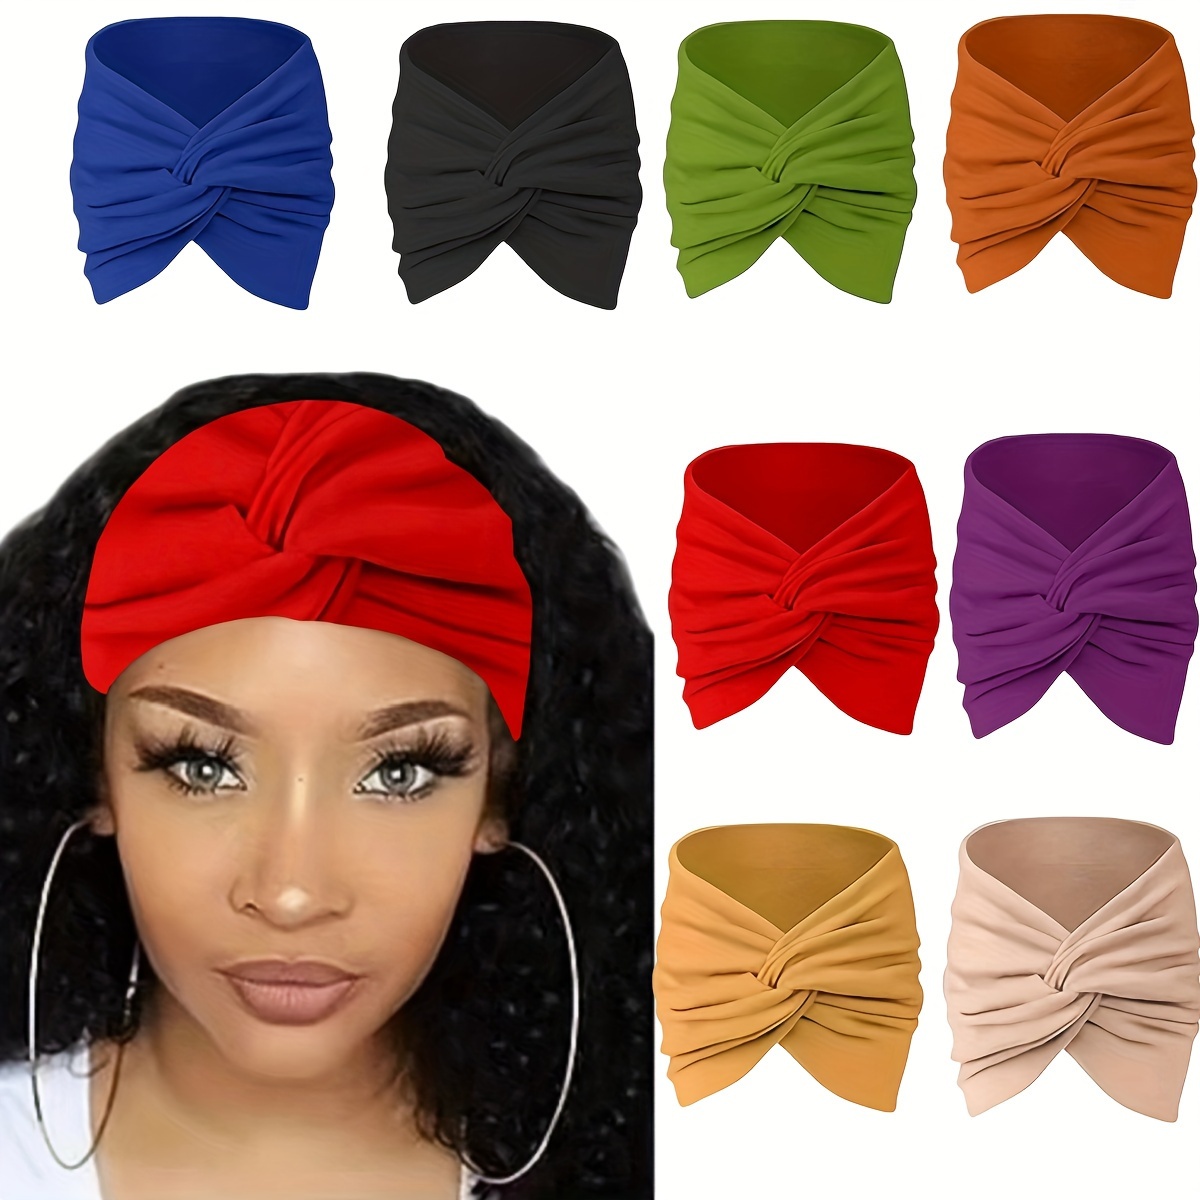 

8-piece Women's Fashion Printed Wide Knotted Headbands - Elastic, Non-slip, Vintage Style For Yoga, Running & Sports Headbands For Women Womens Headbands